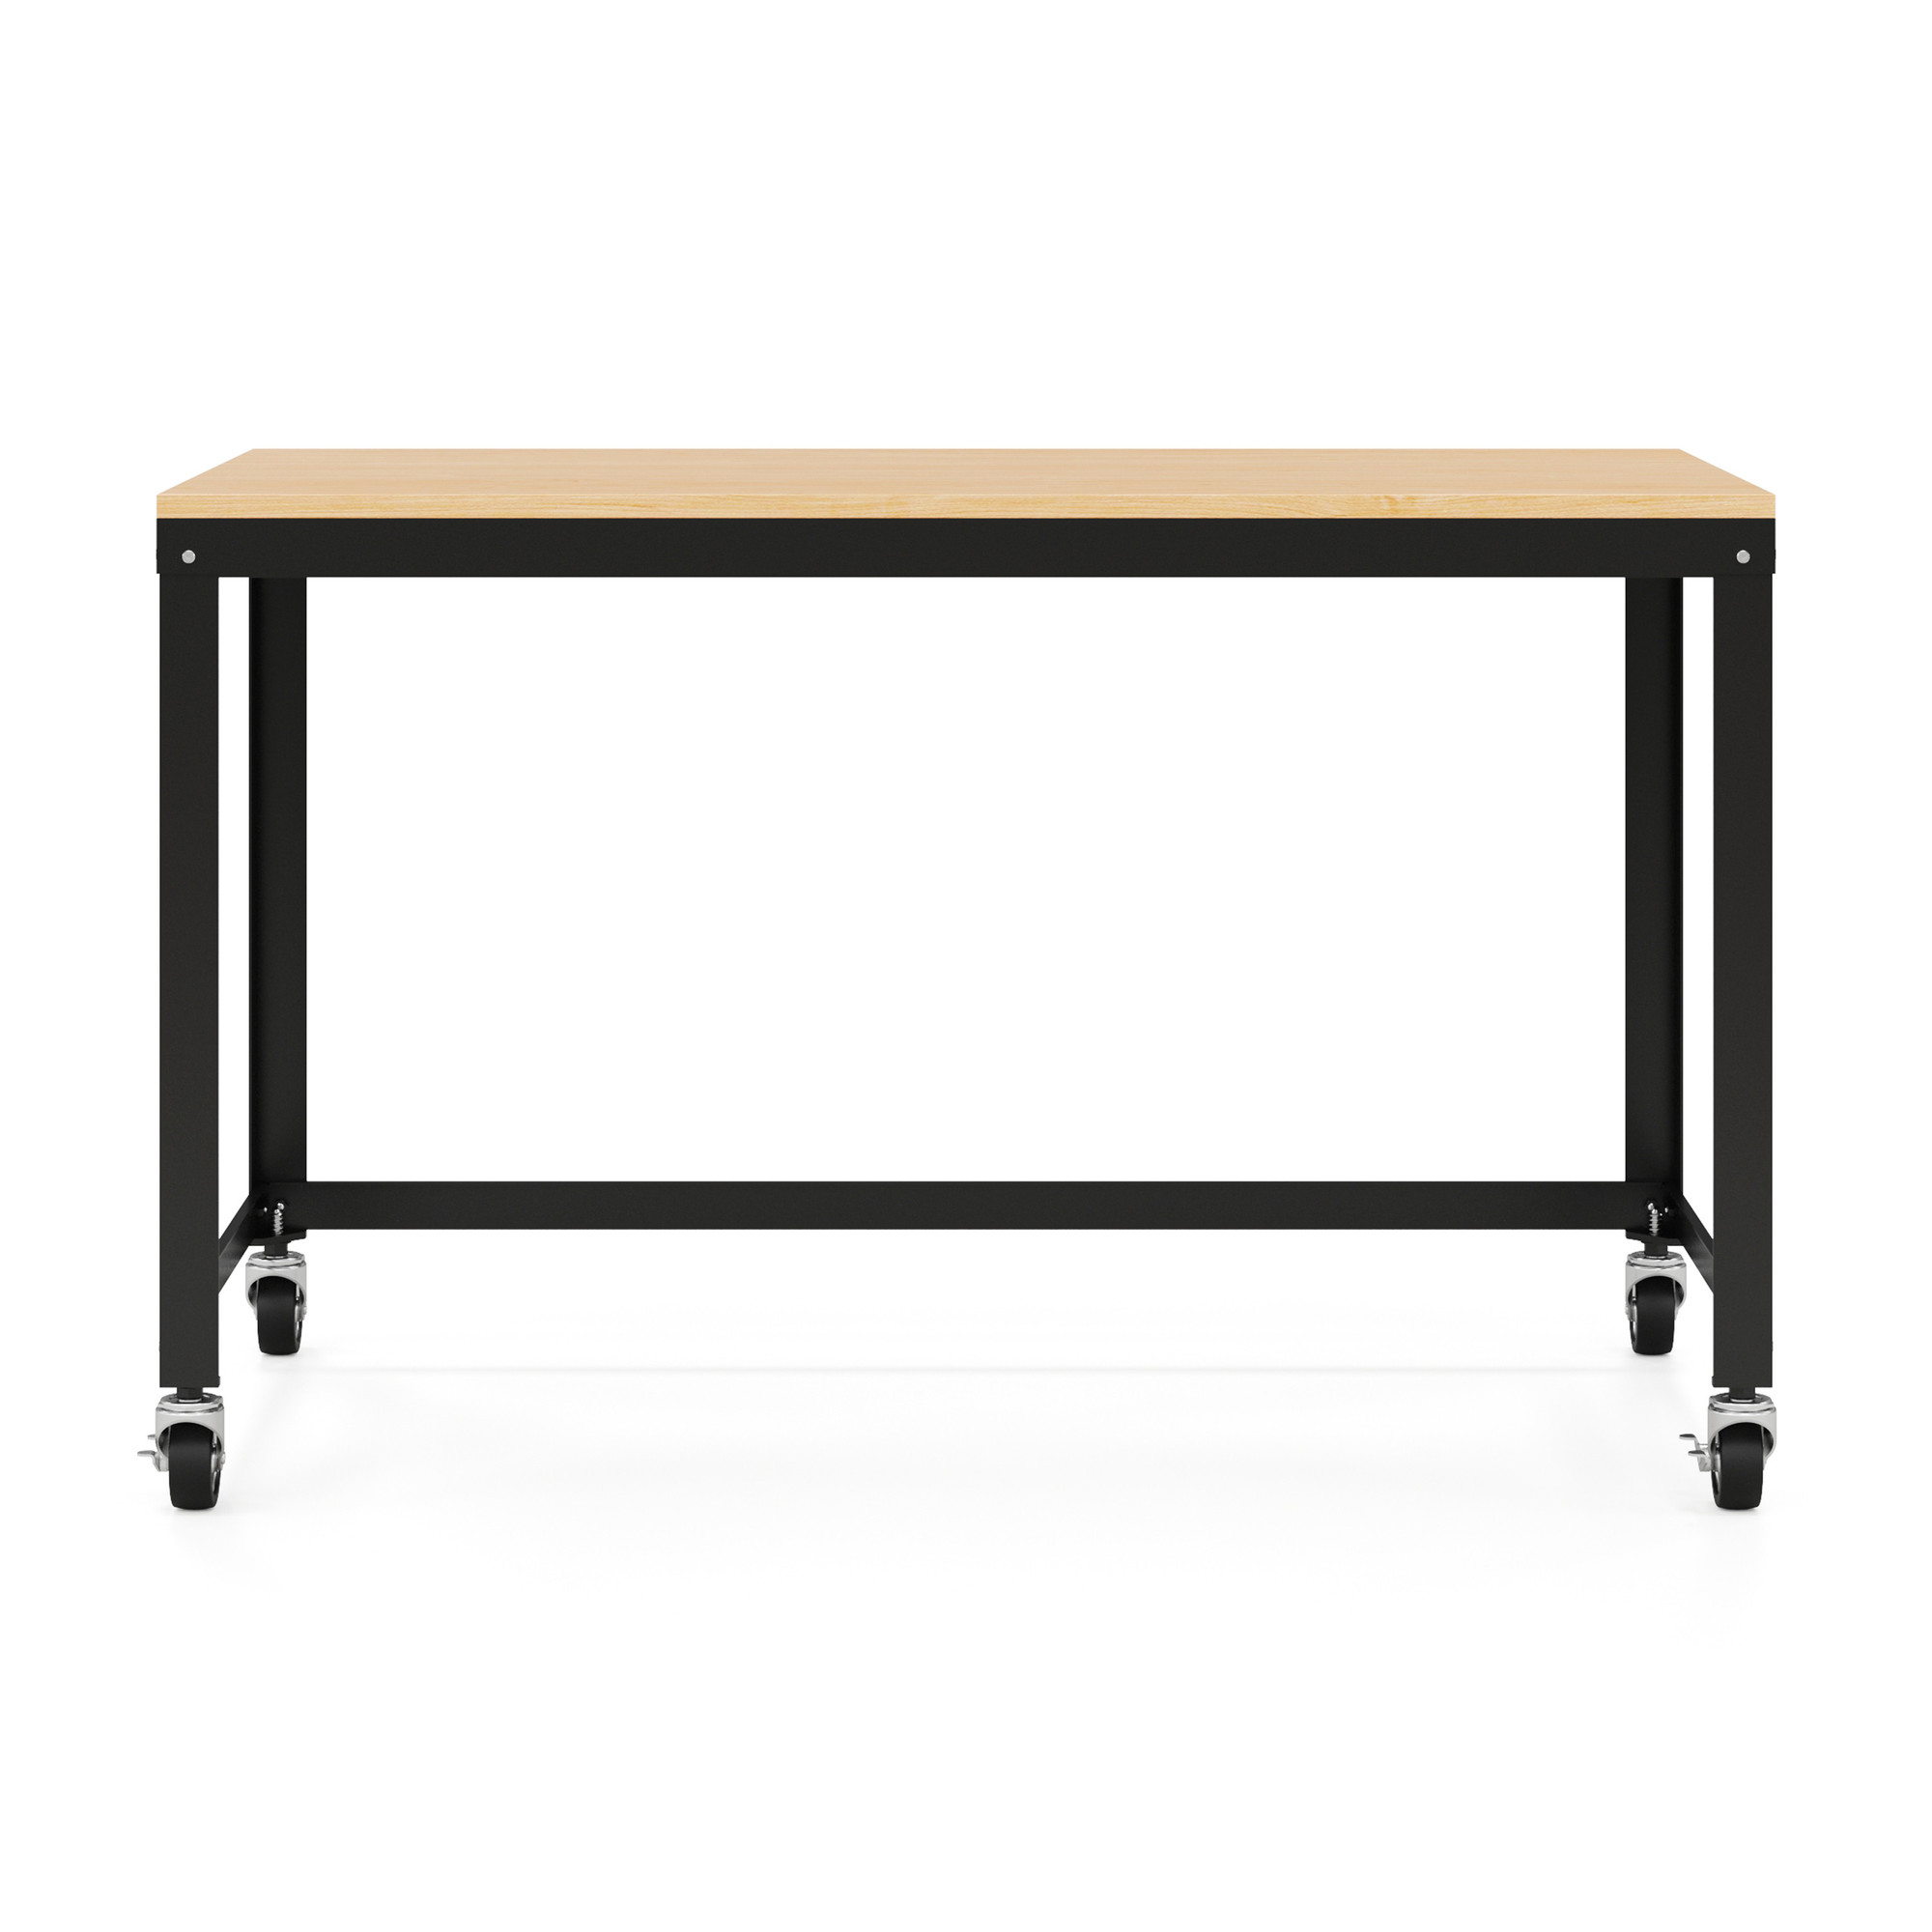 Hirsh Industries, Ready-To-Assemble 48Inch Mobile Desk w/ Laminate Top, Width 47.45 in, Height 30 in, Depth 23.88 in, Model 24971